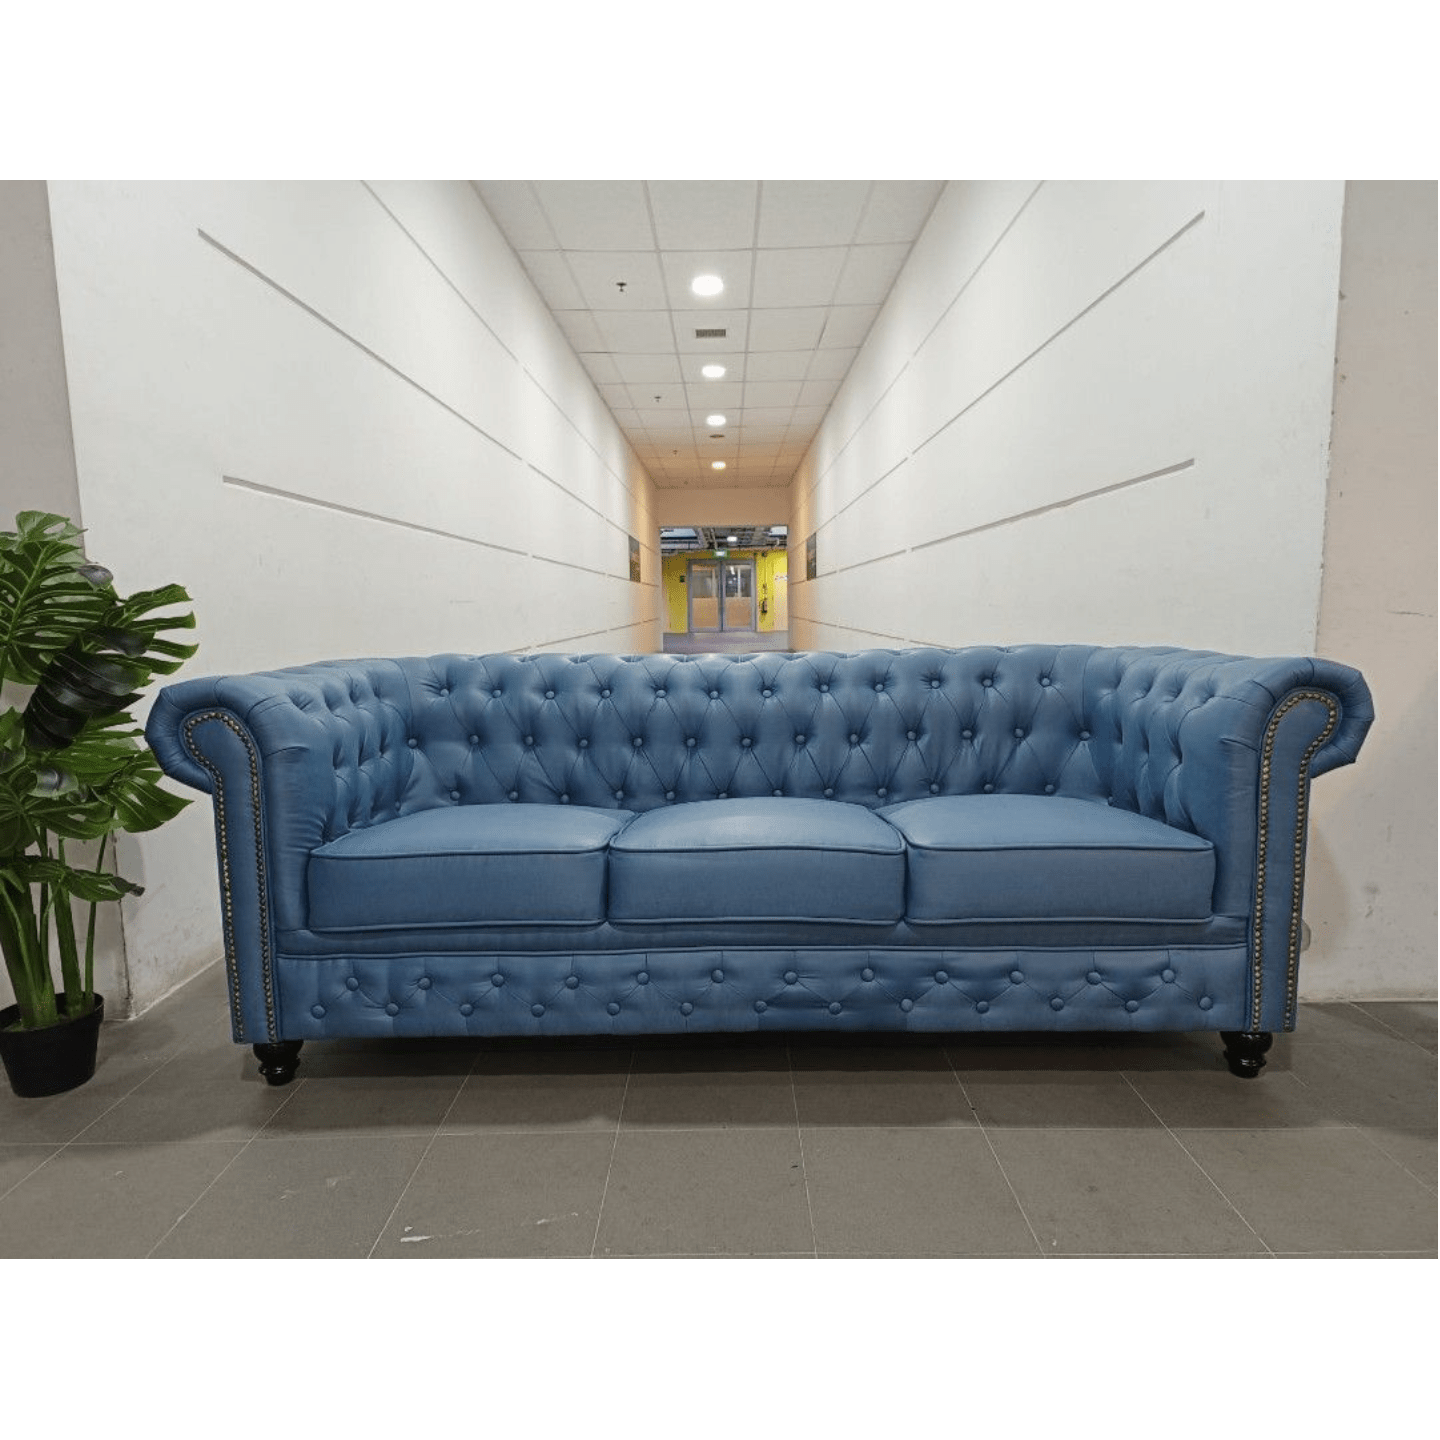 CAT FRIENDLY SALVADORE X 3 Seater Sofa in CERULEAN BLUE TECH LEATHAIRE